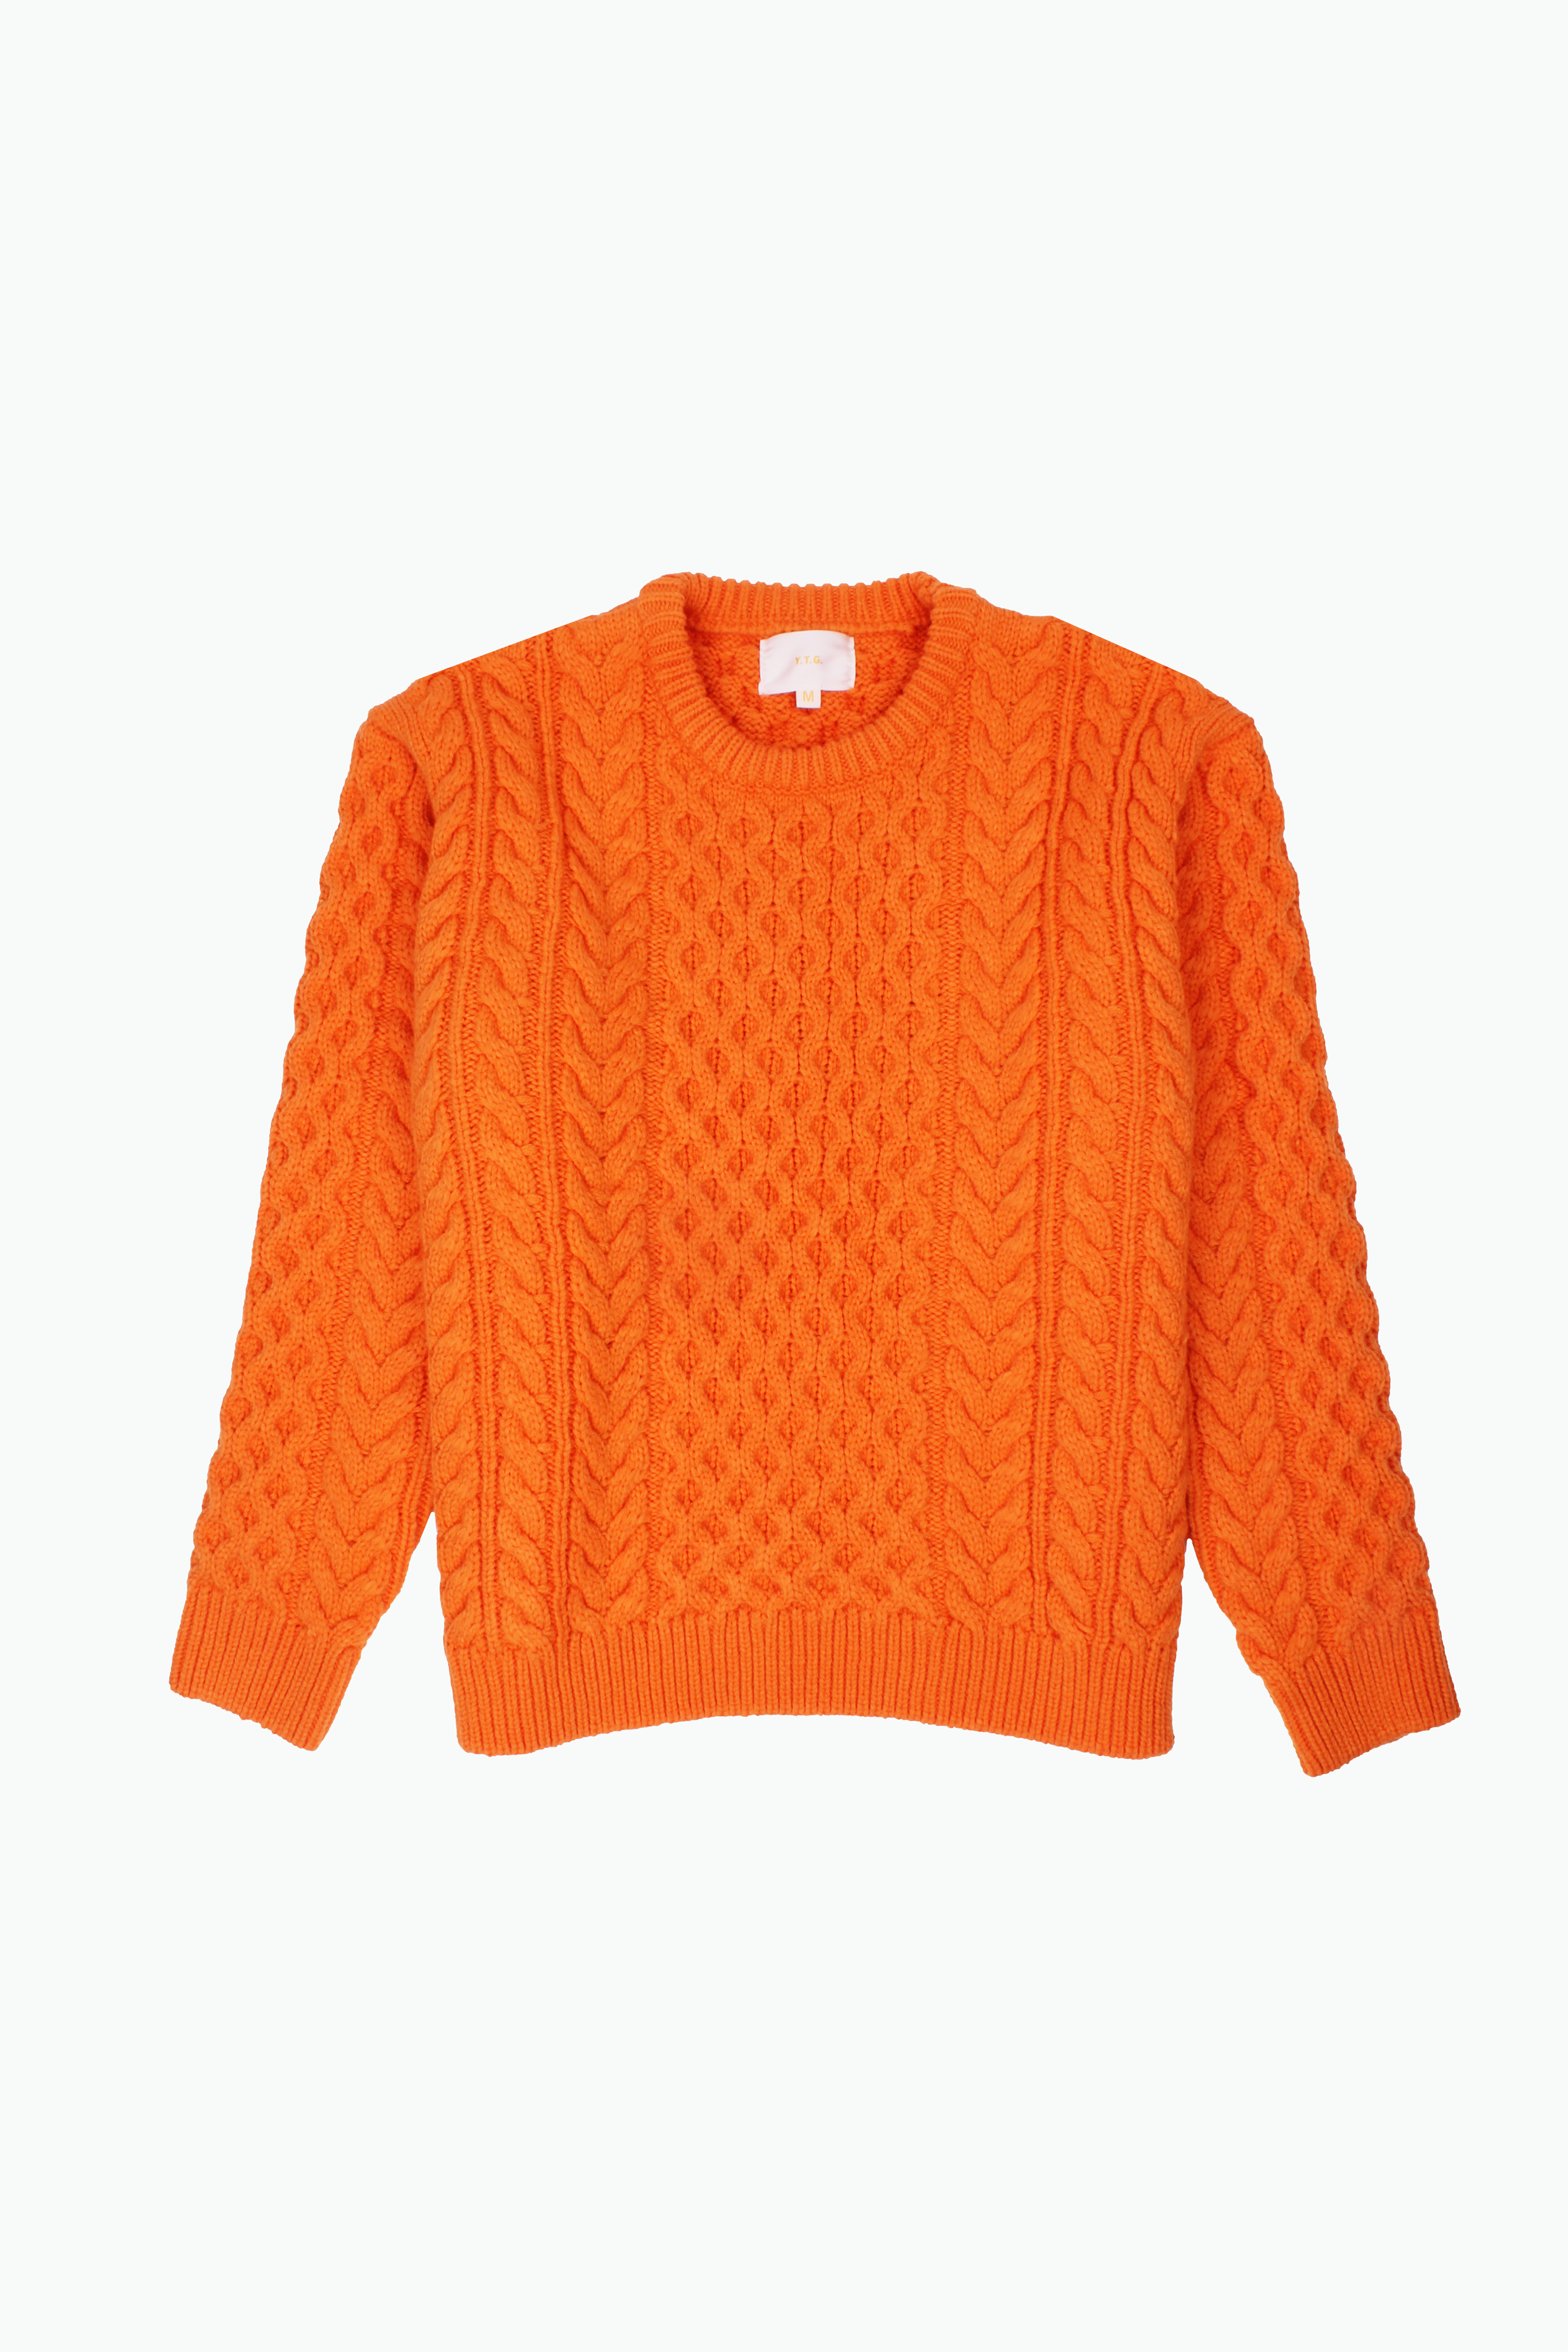 Blood Orange Cable Knit Sweater